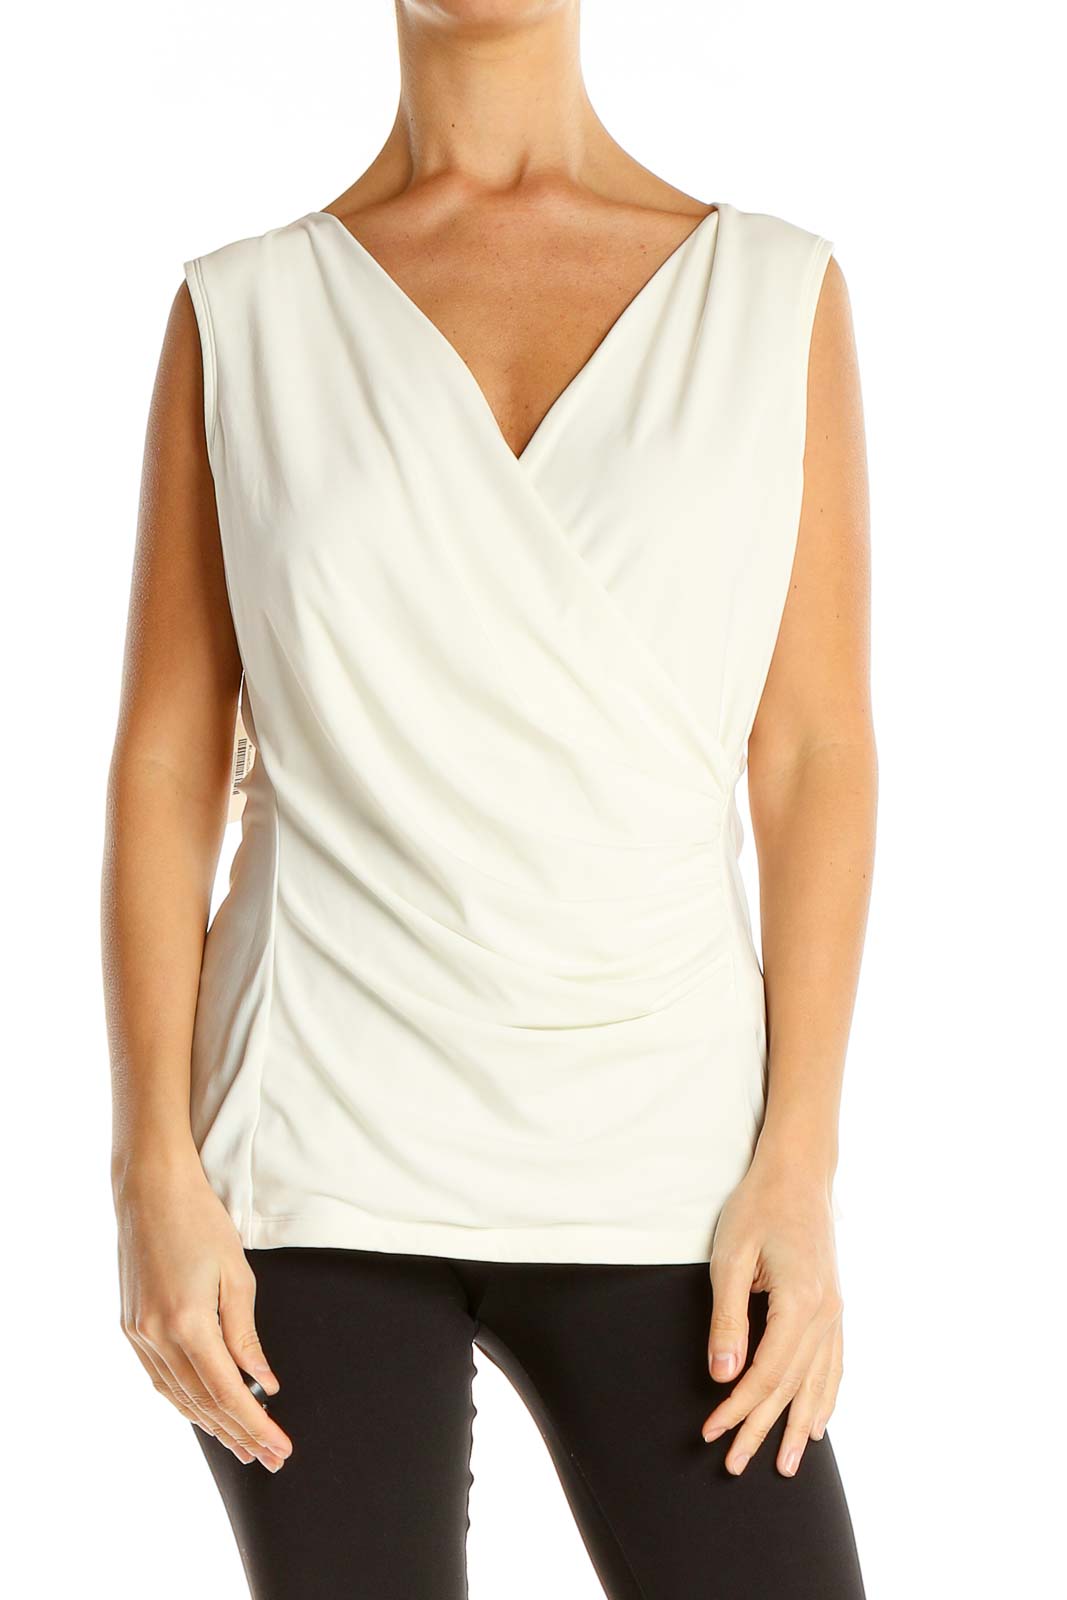 White Chic Blouse Front